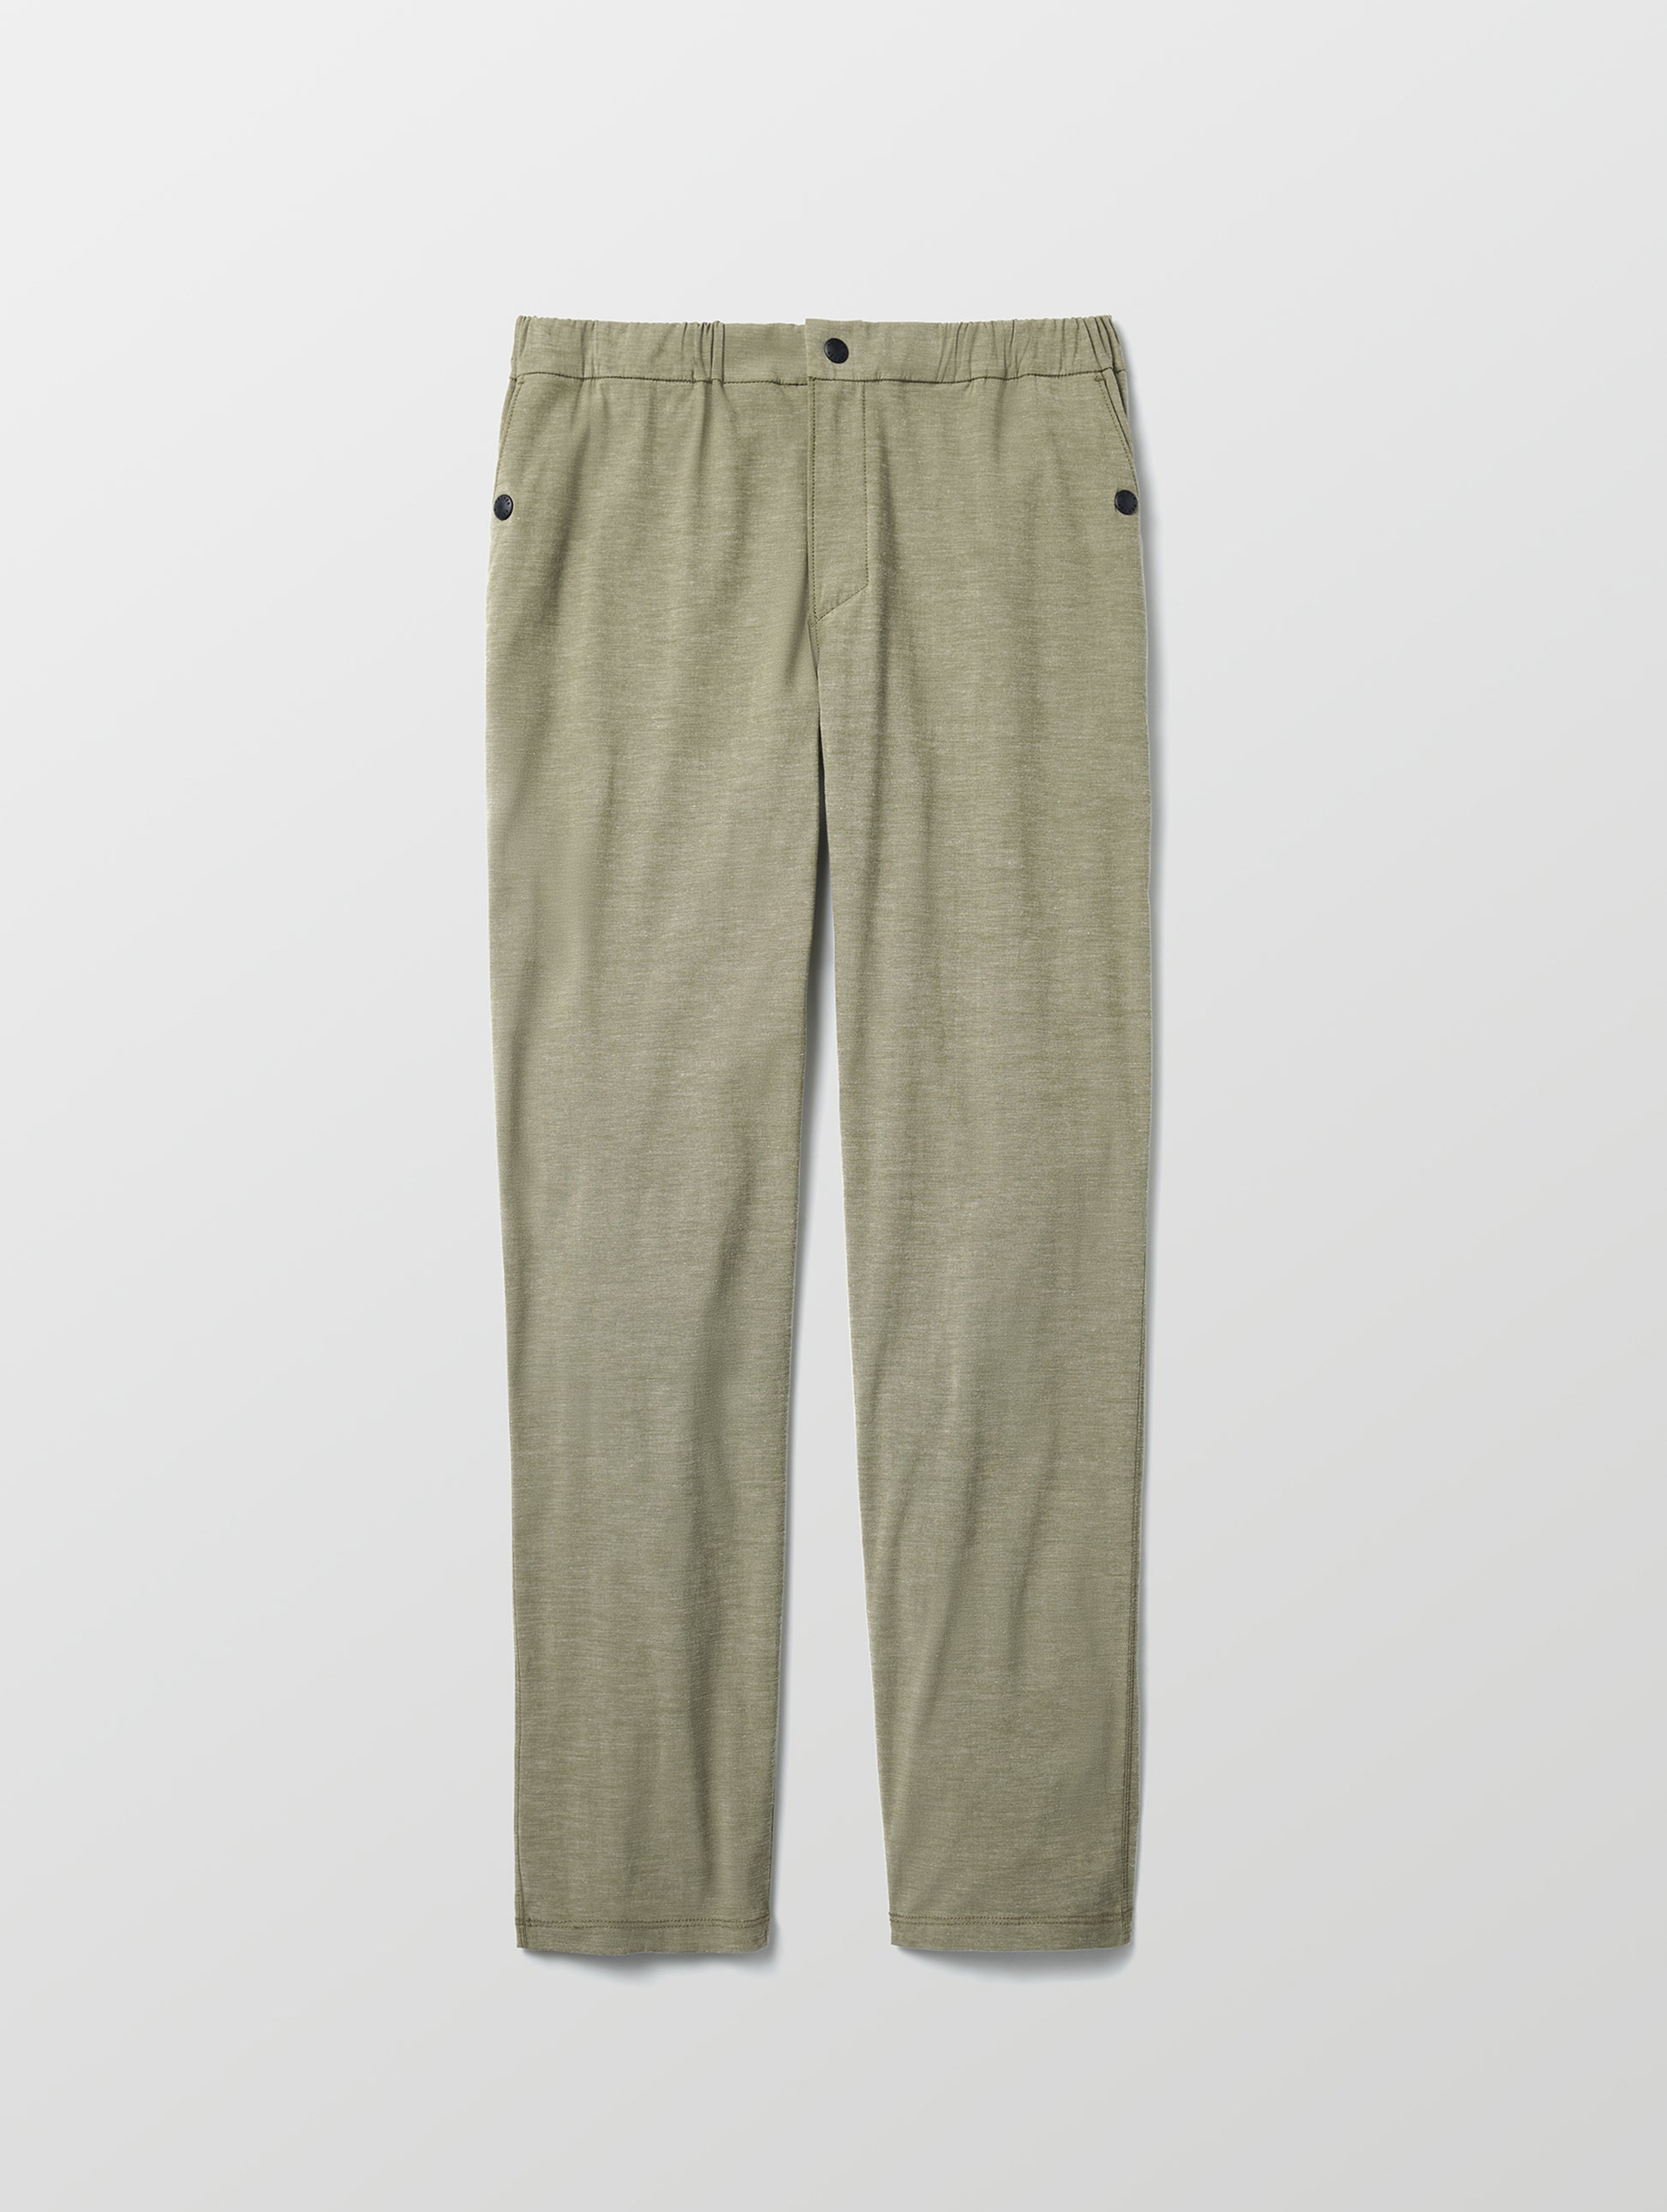 green pants from AETHER Apparel